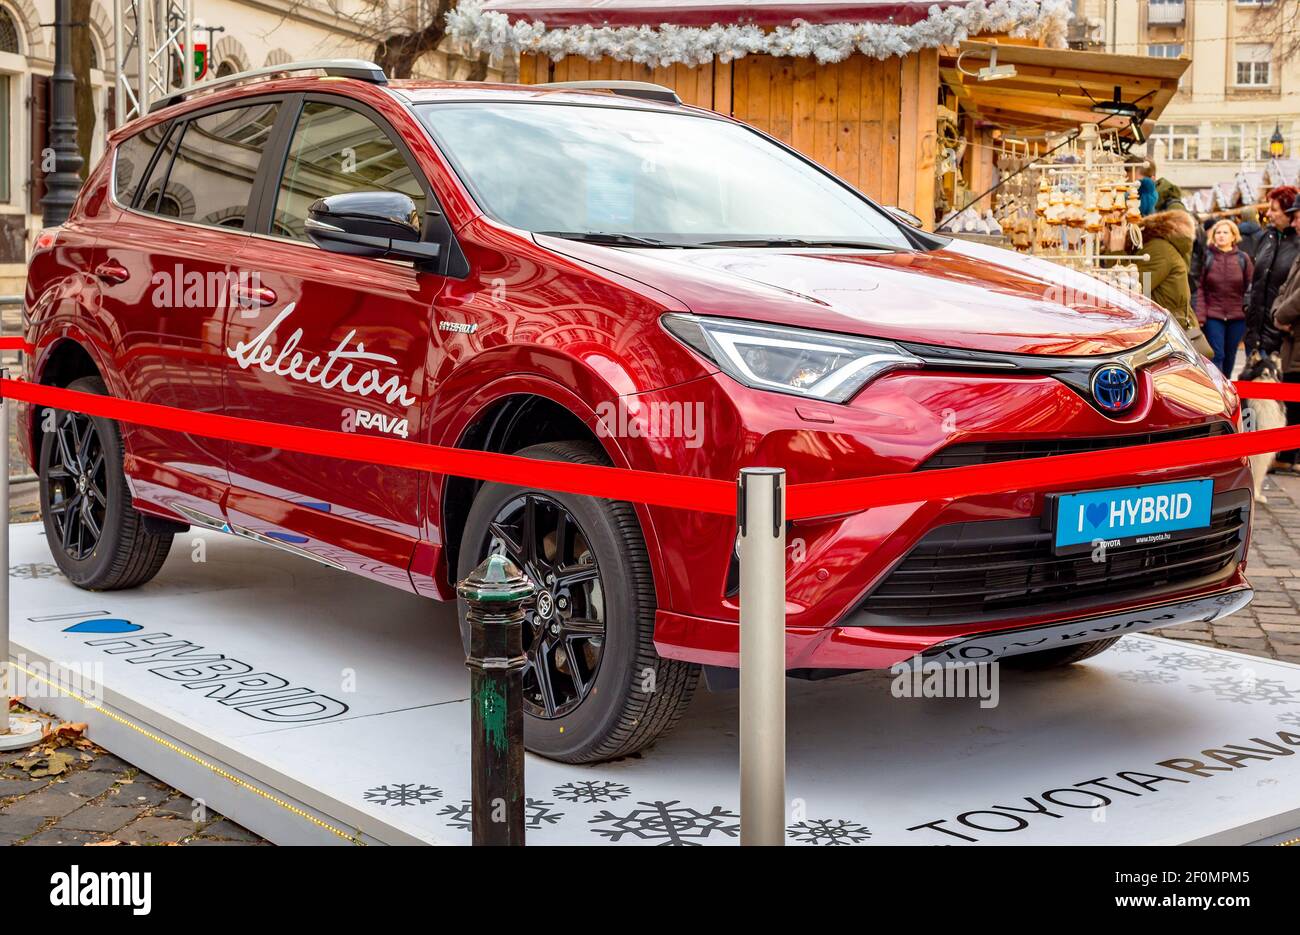 Budapest, Hungary - December 24, 2017: Red Toyota RAV4 Hybrid on display stand at the christmas market in Budapest, Hungary Stock Photo